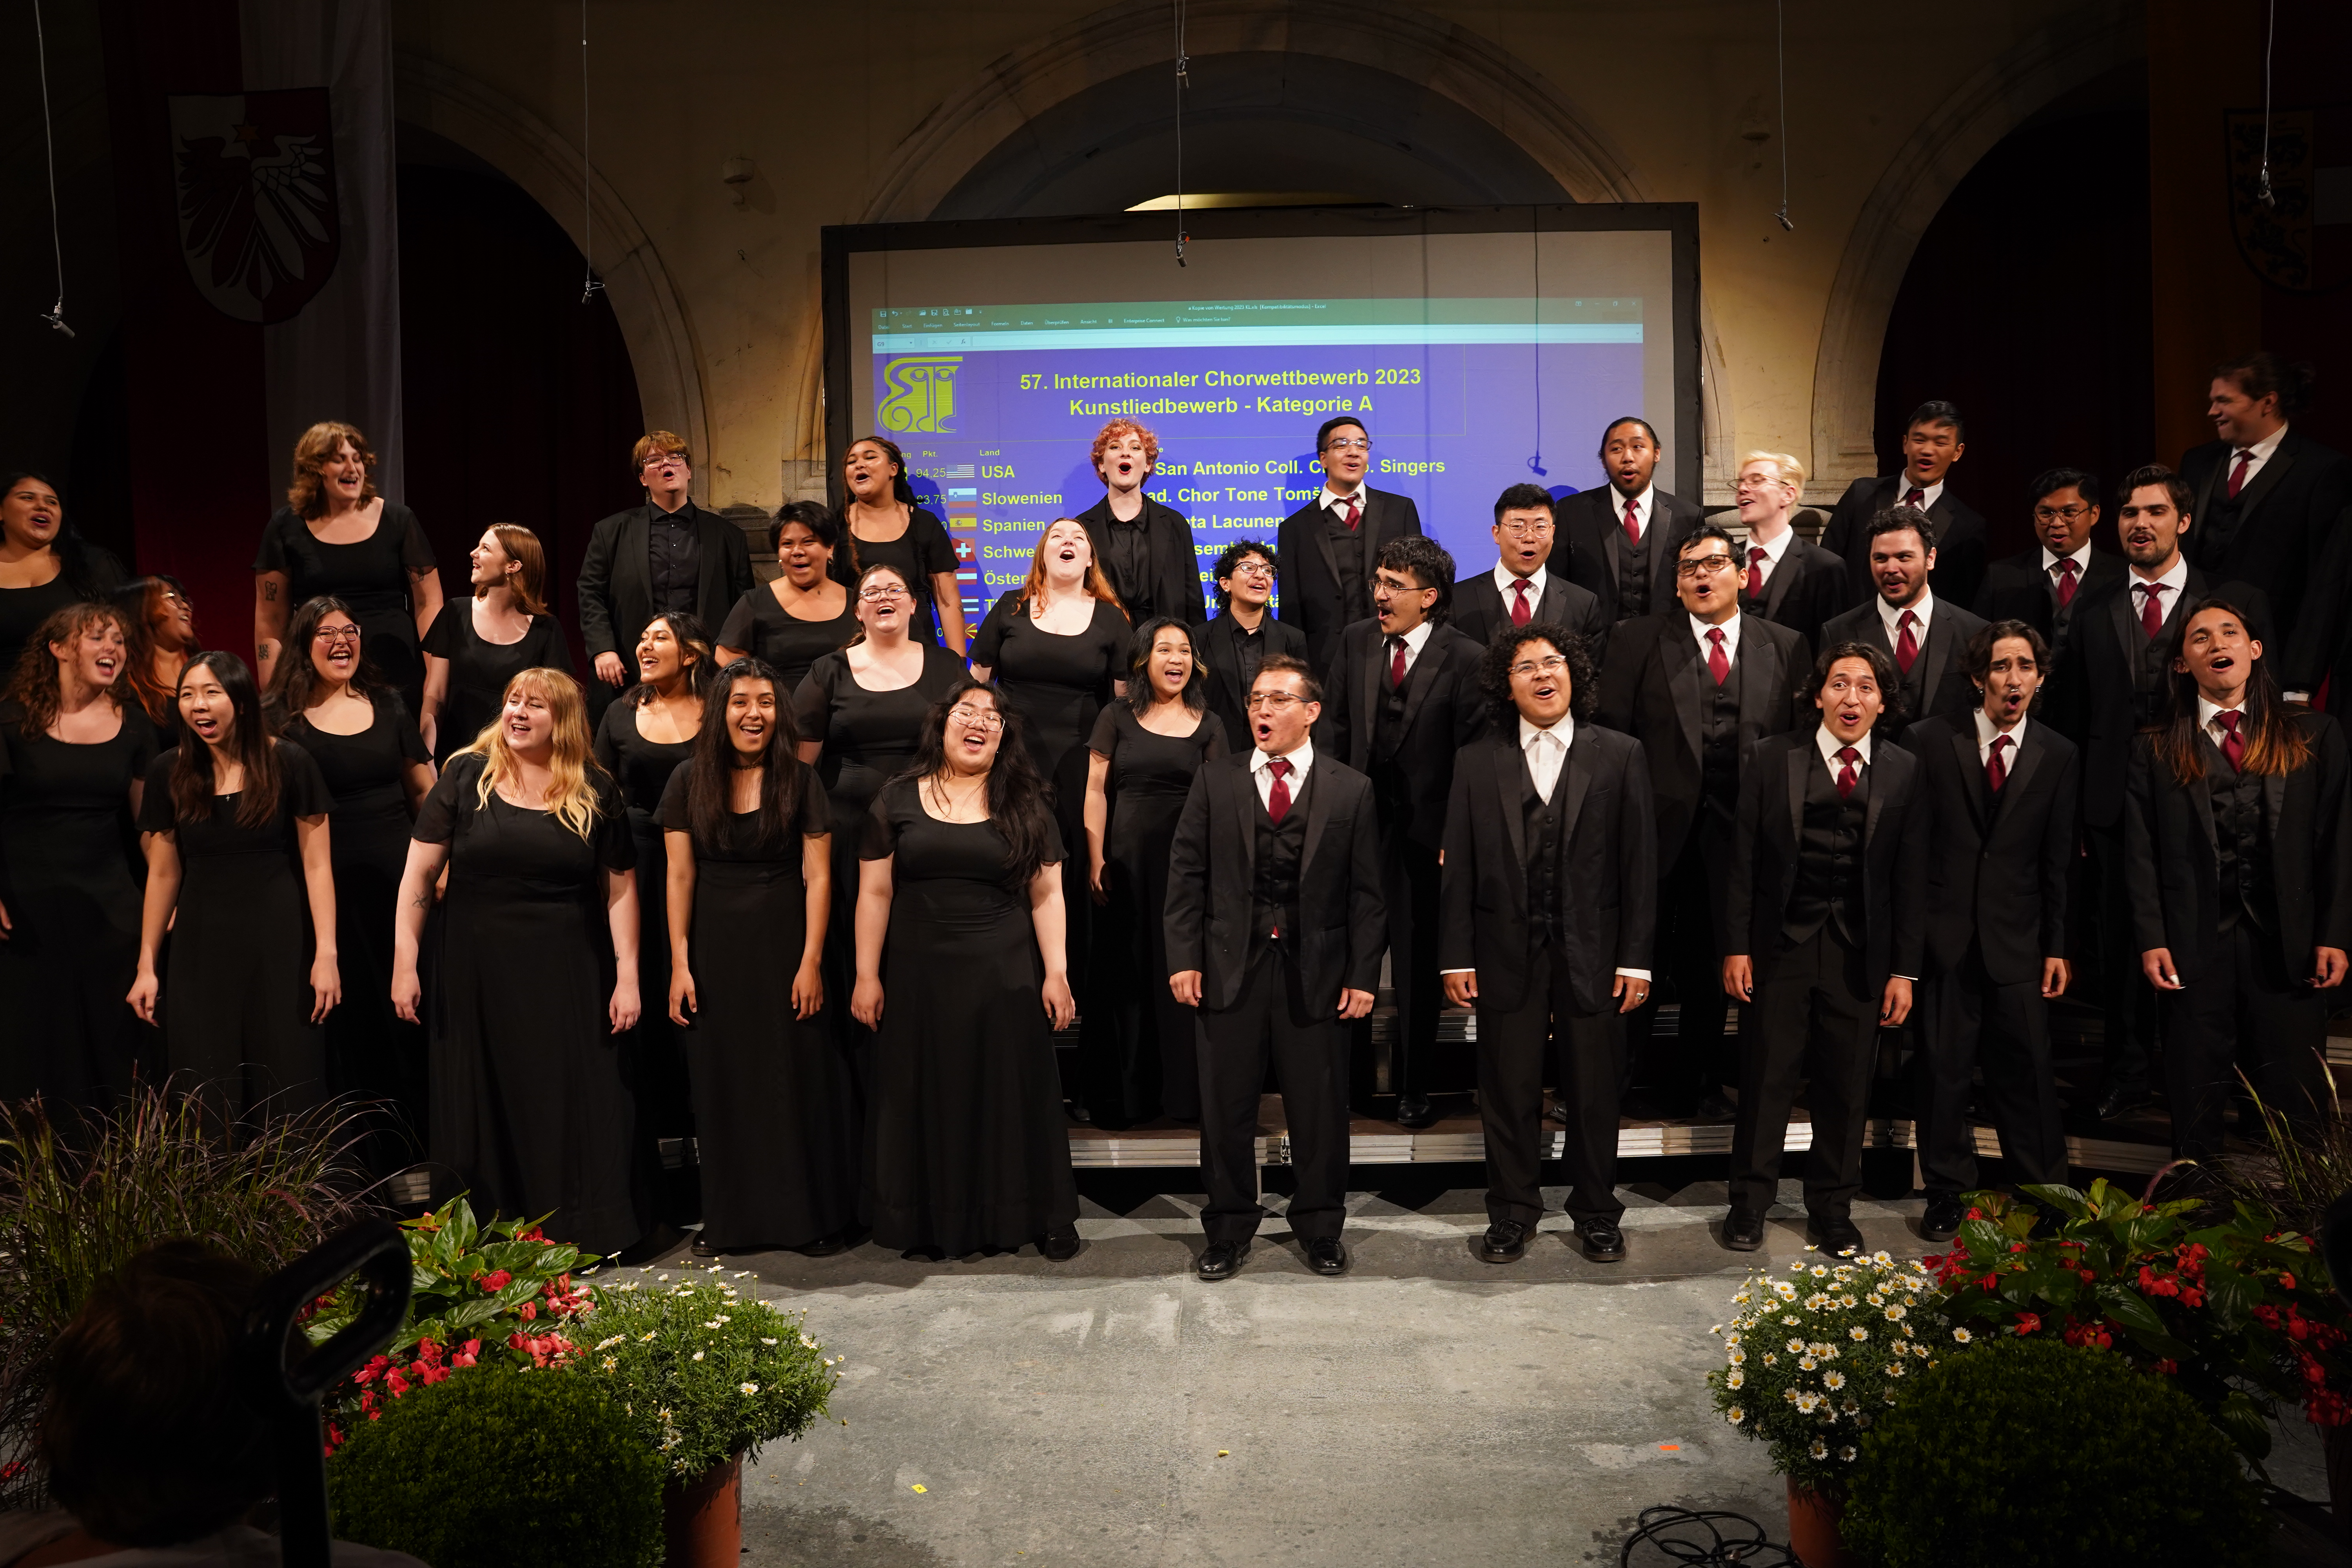 Large group of singers perform while dressed formally